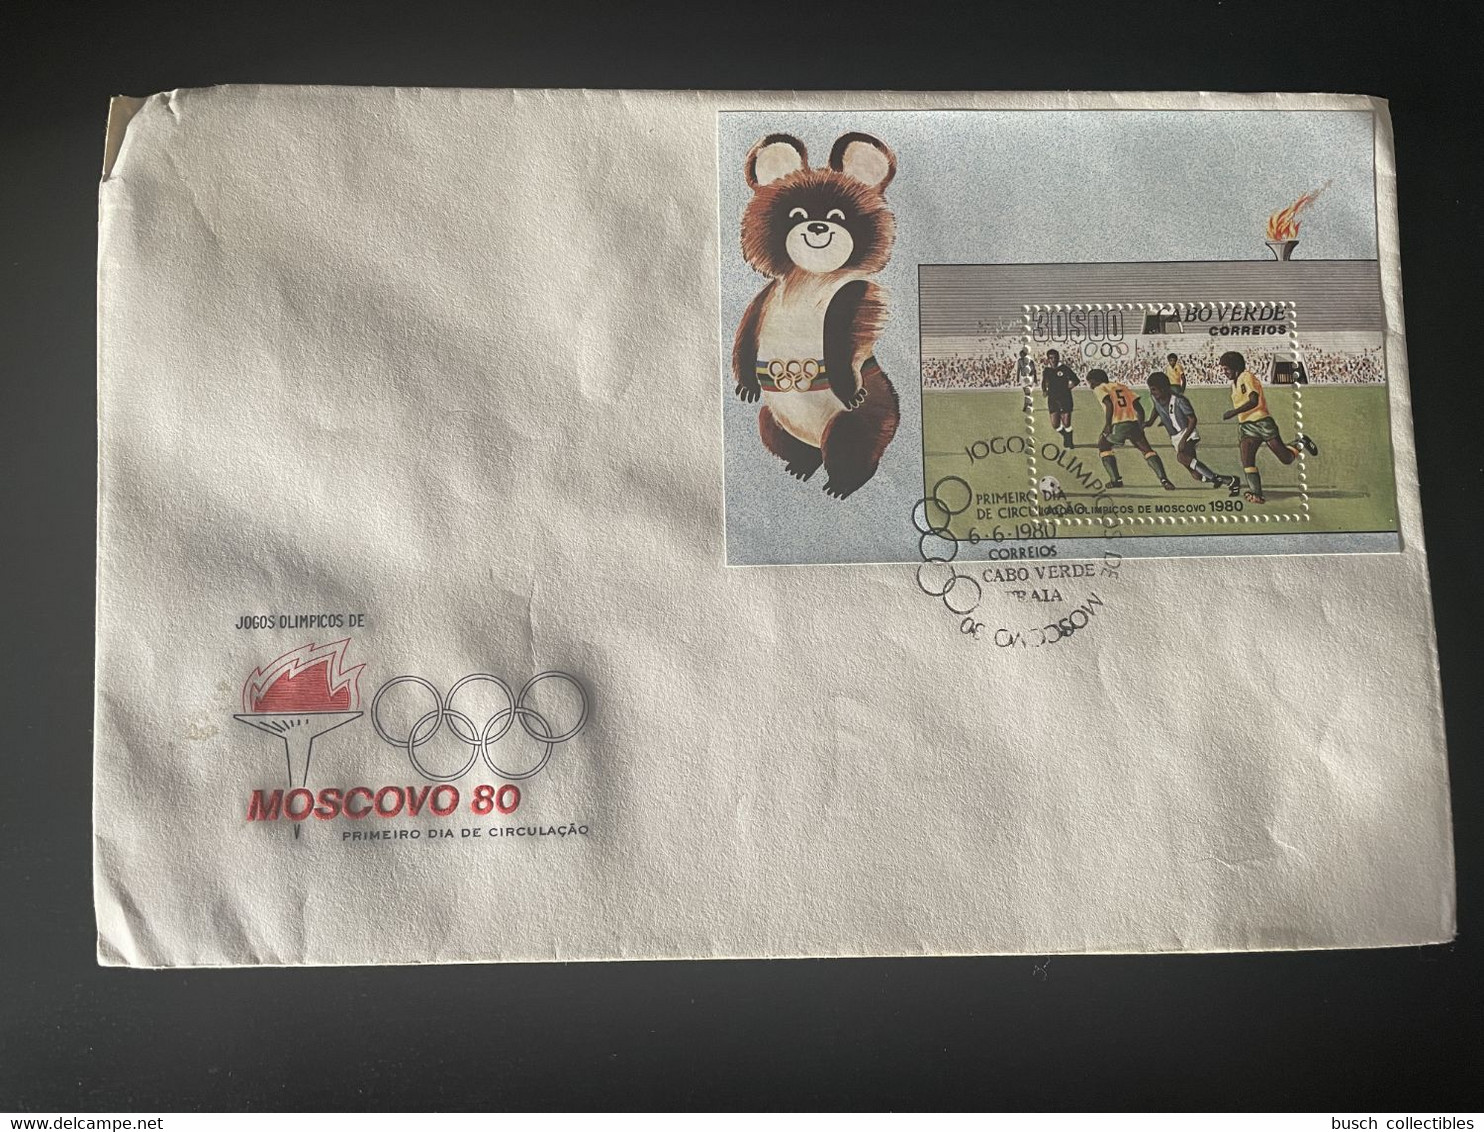 Cape Verde Cabo Verde 1980 Mi. Bl. 2 FDC Olympic Games Jeux Olympiques Olympia Moscou Moscow Moskau - Kap Verde